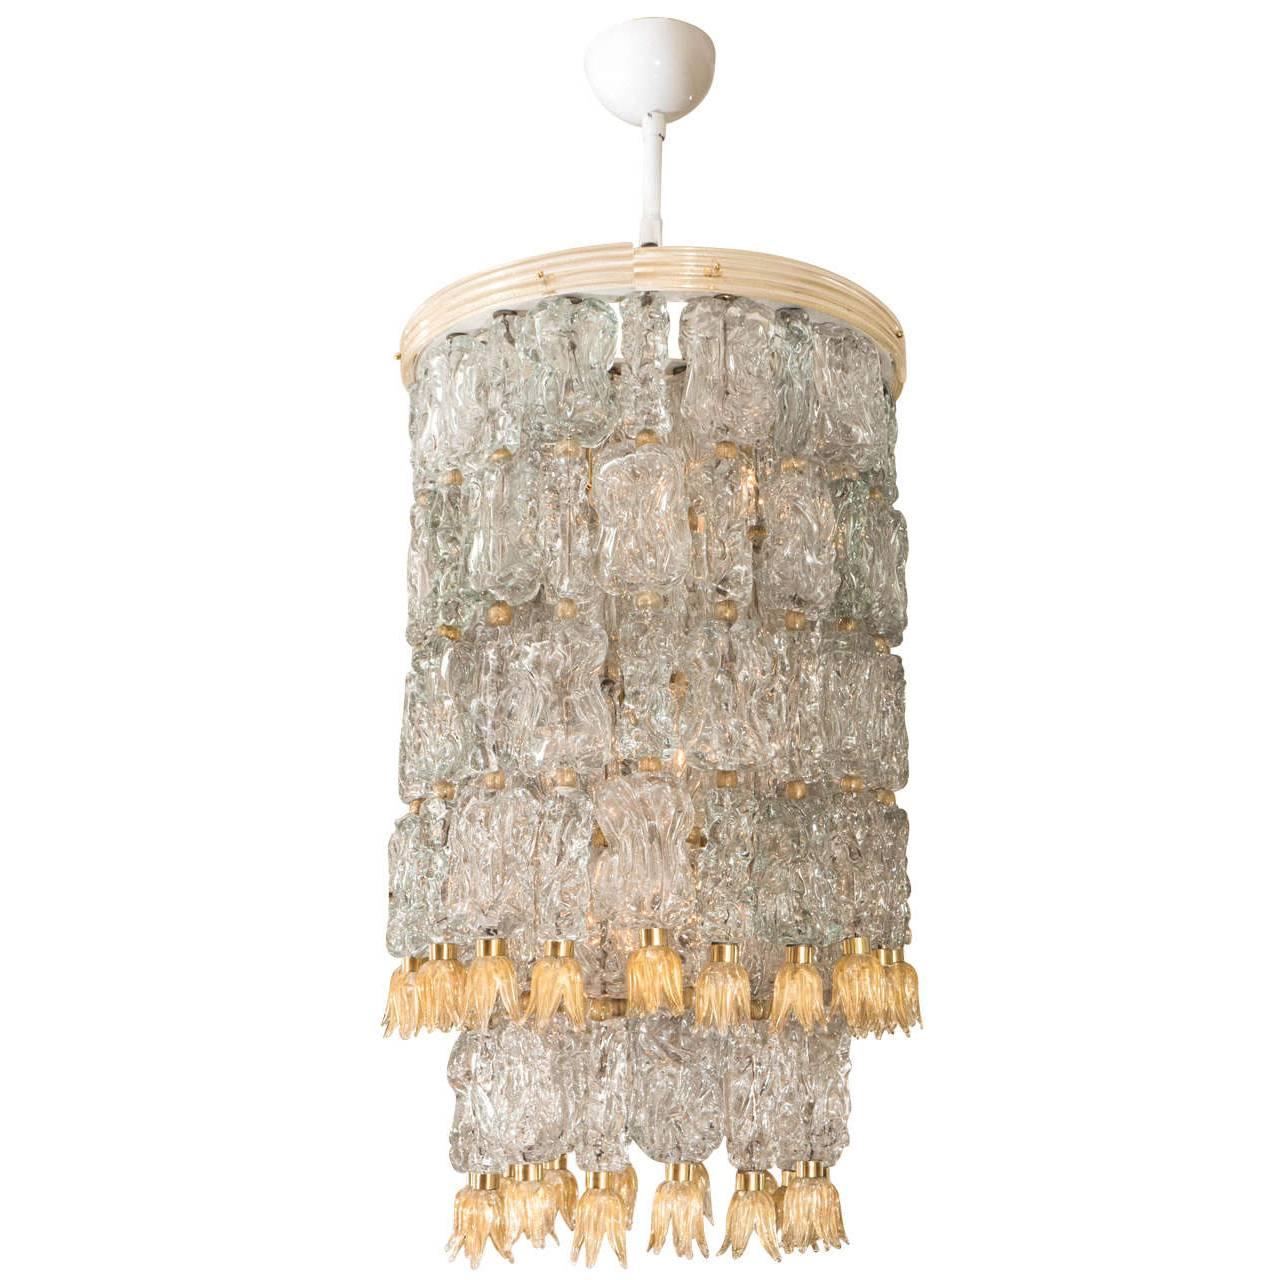 Tiered chandeliers composed of textured glass elements